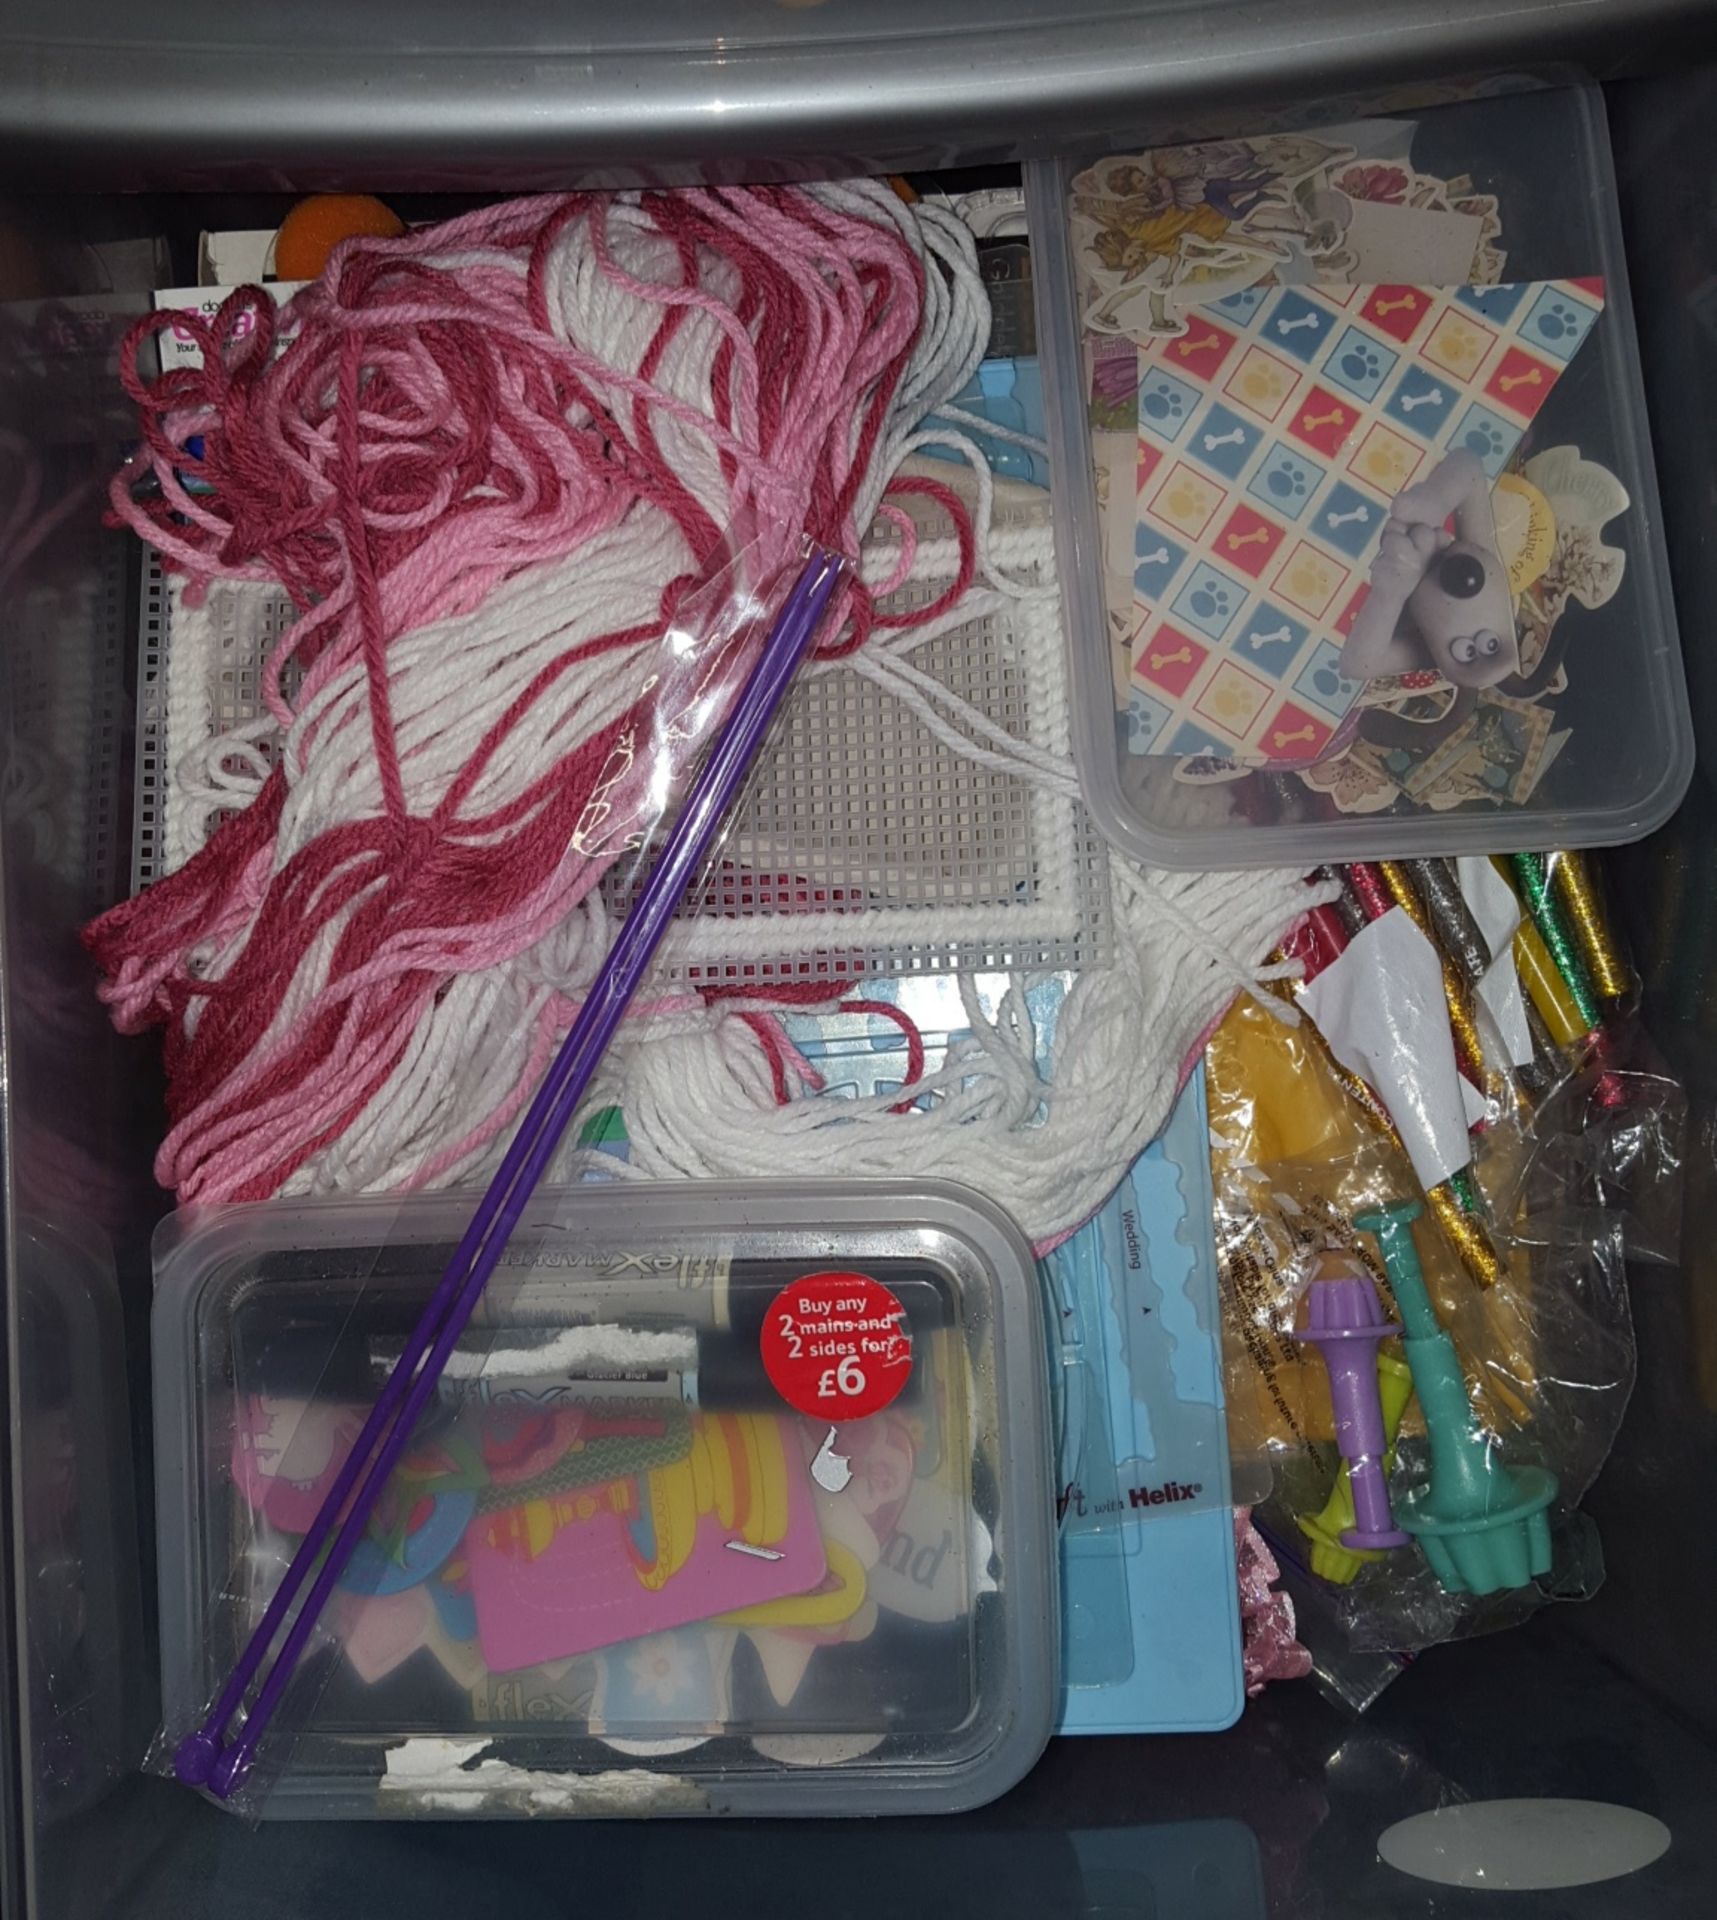 4 Drawer Storage Cabinet & Crafting Materials - Image 2 of 4